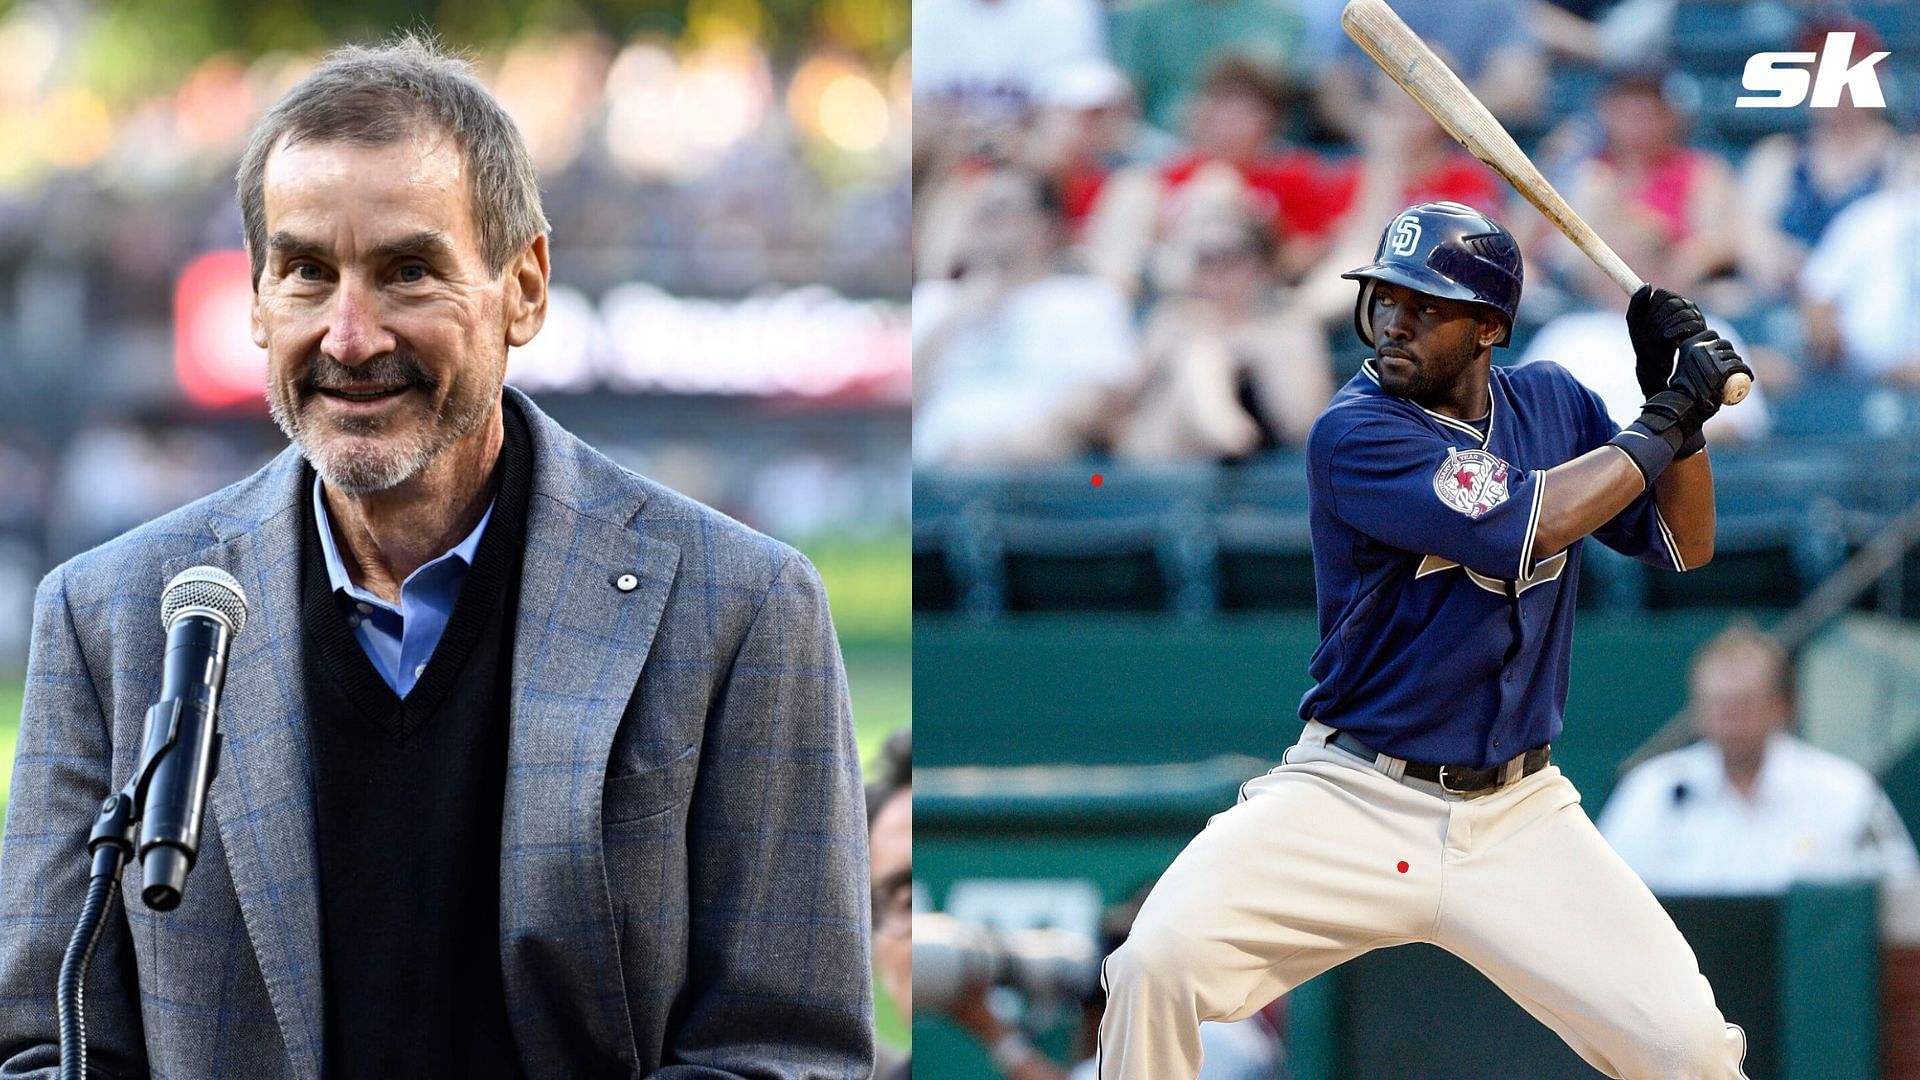 Tony Gwynn Jr. has spoken highly of Padres owner Peter Seidler, who passed away on Tuesday